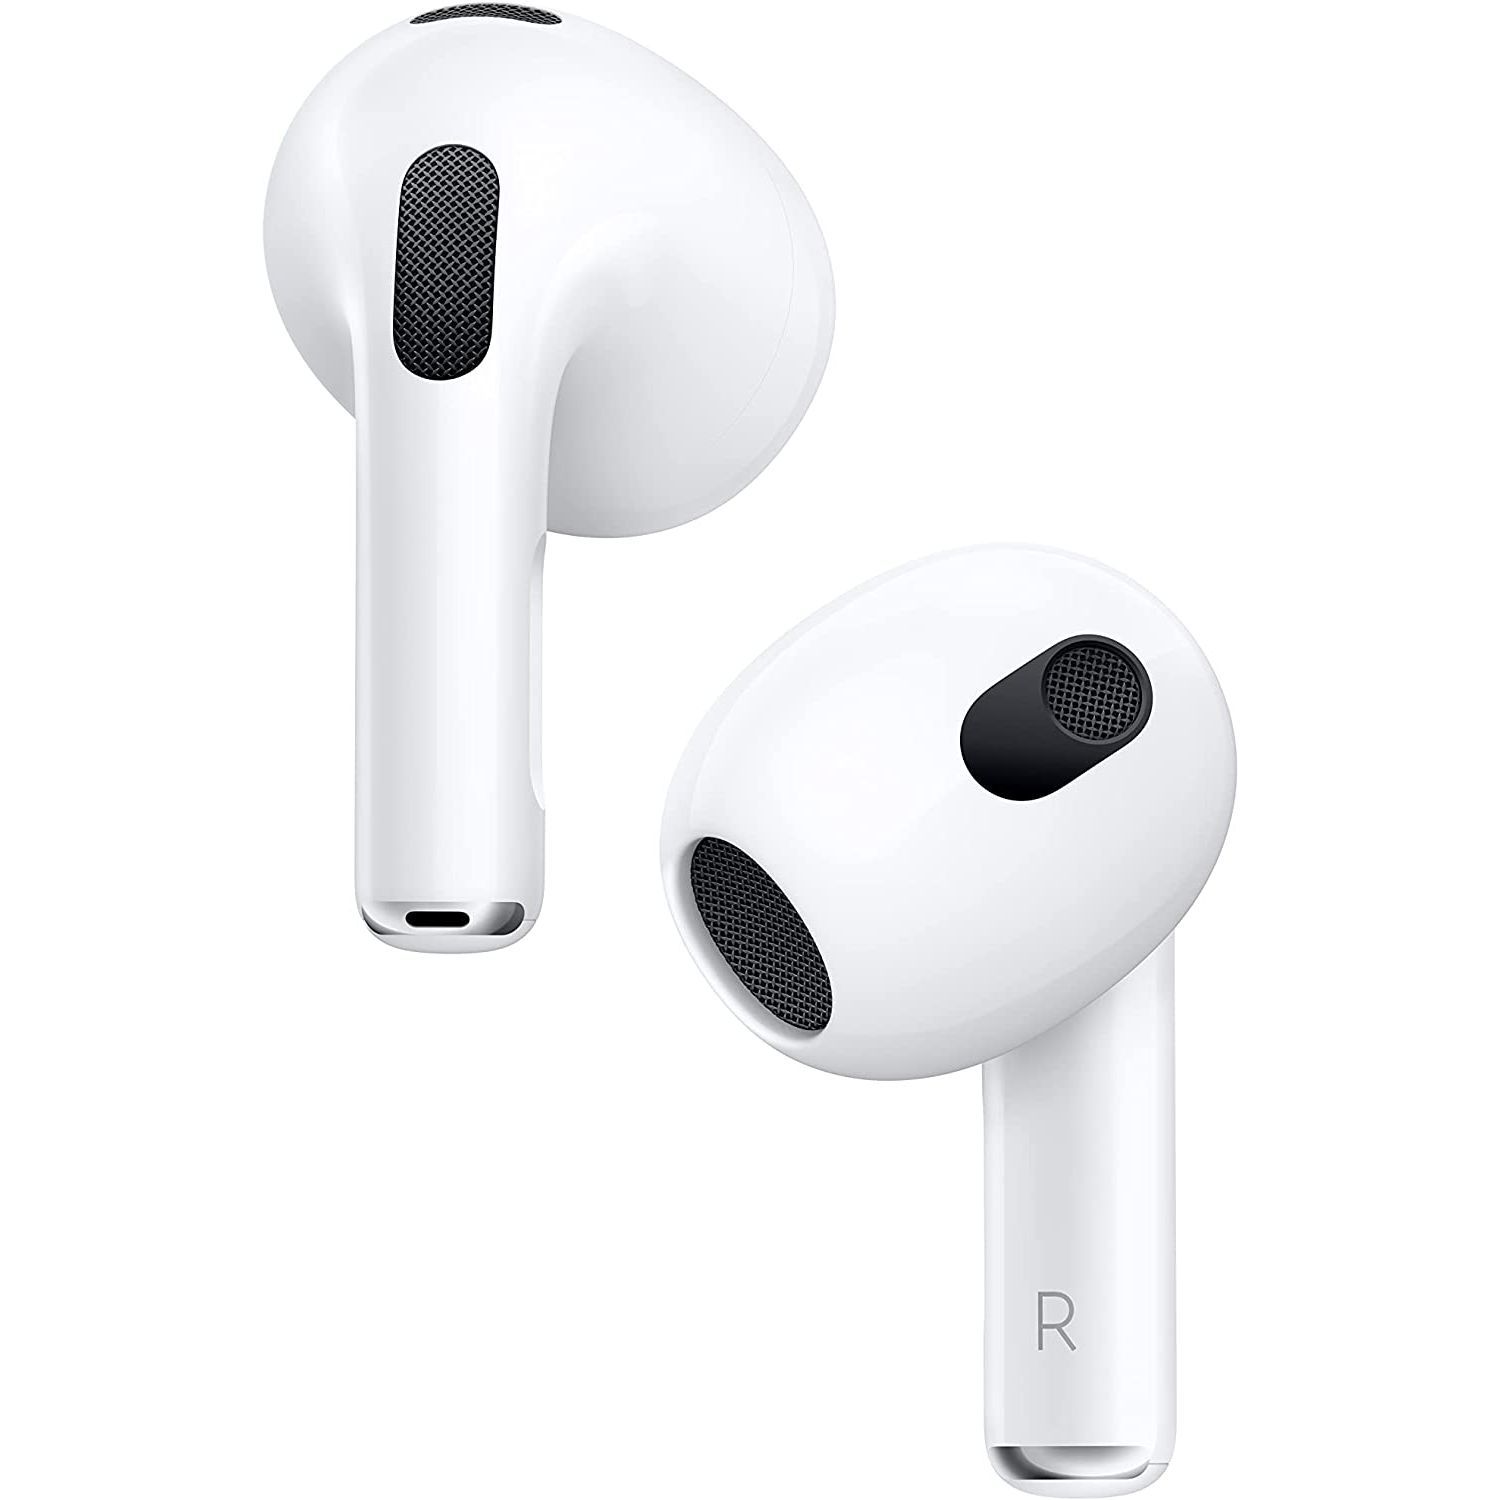 Apple AirPods (3rd Generation) truly wireless earbuds